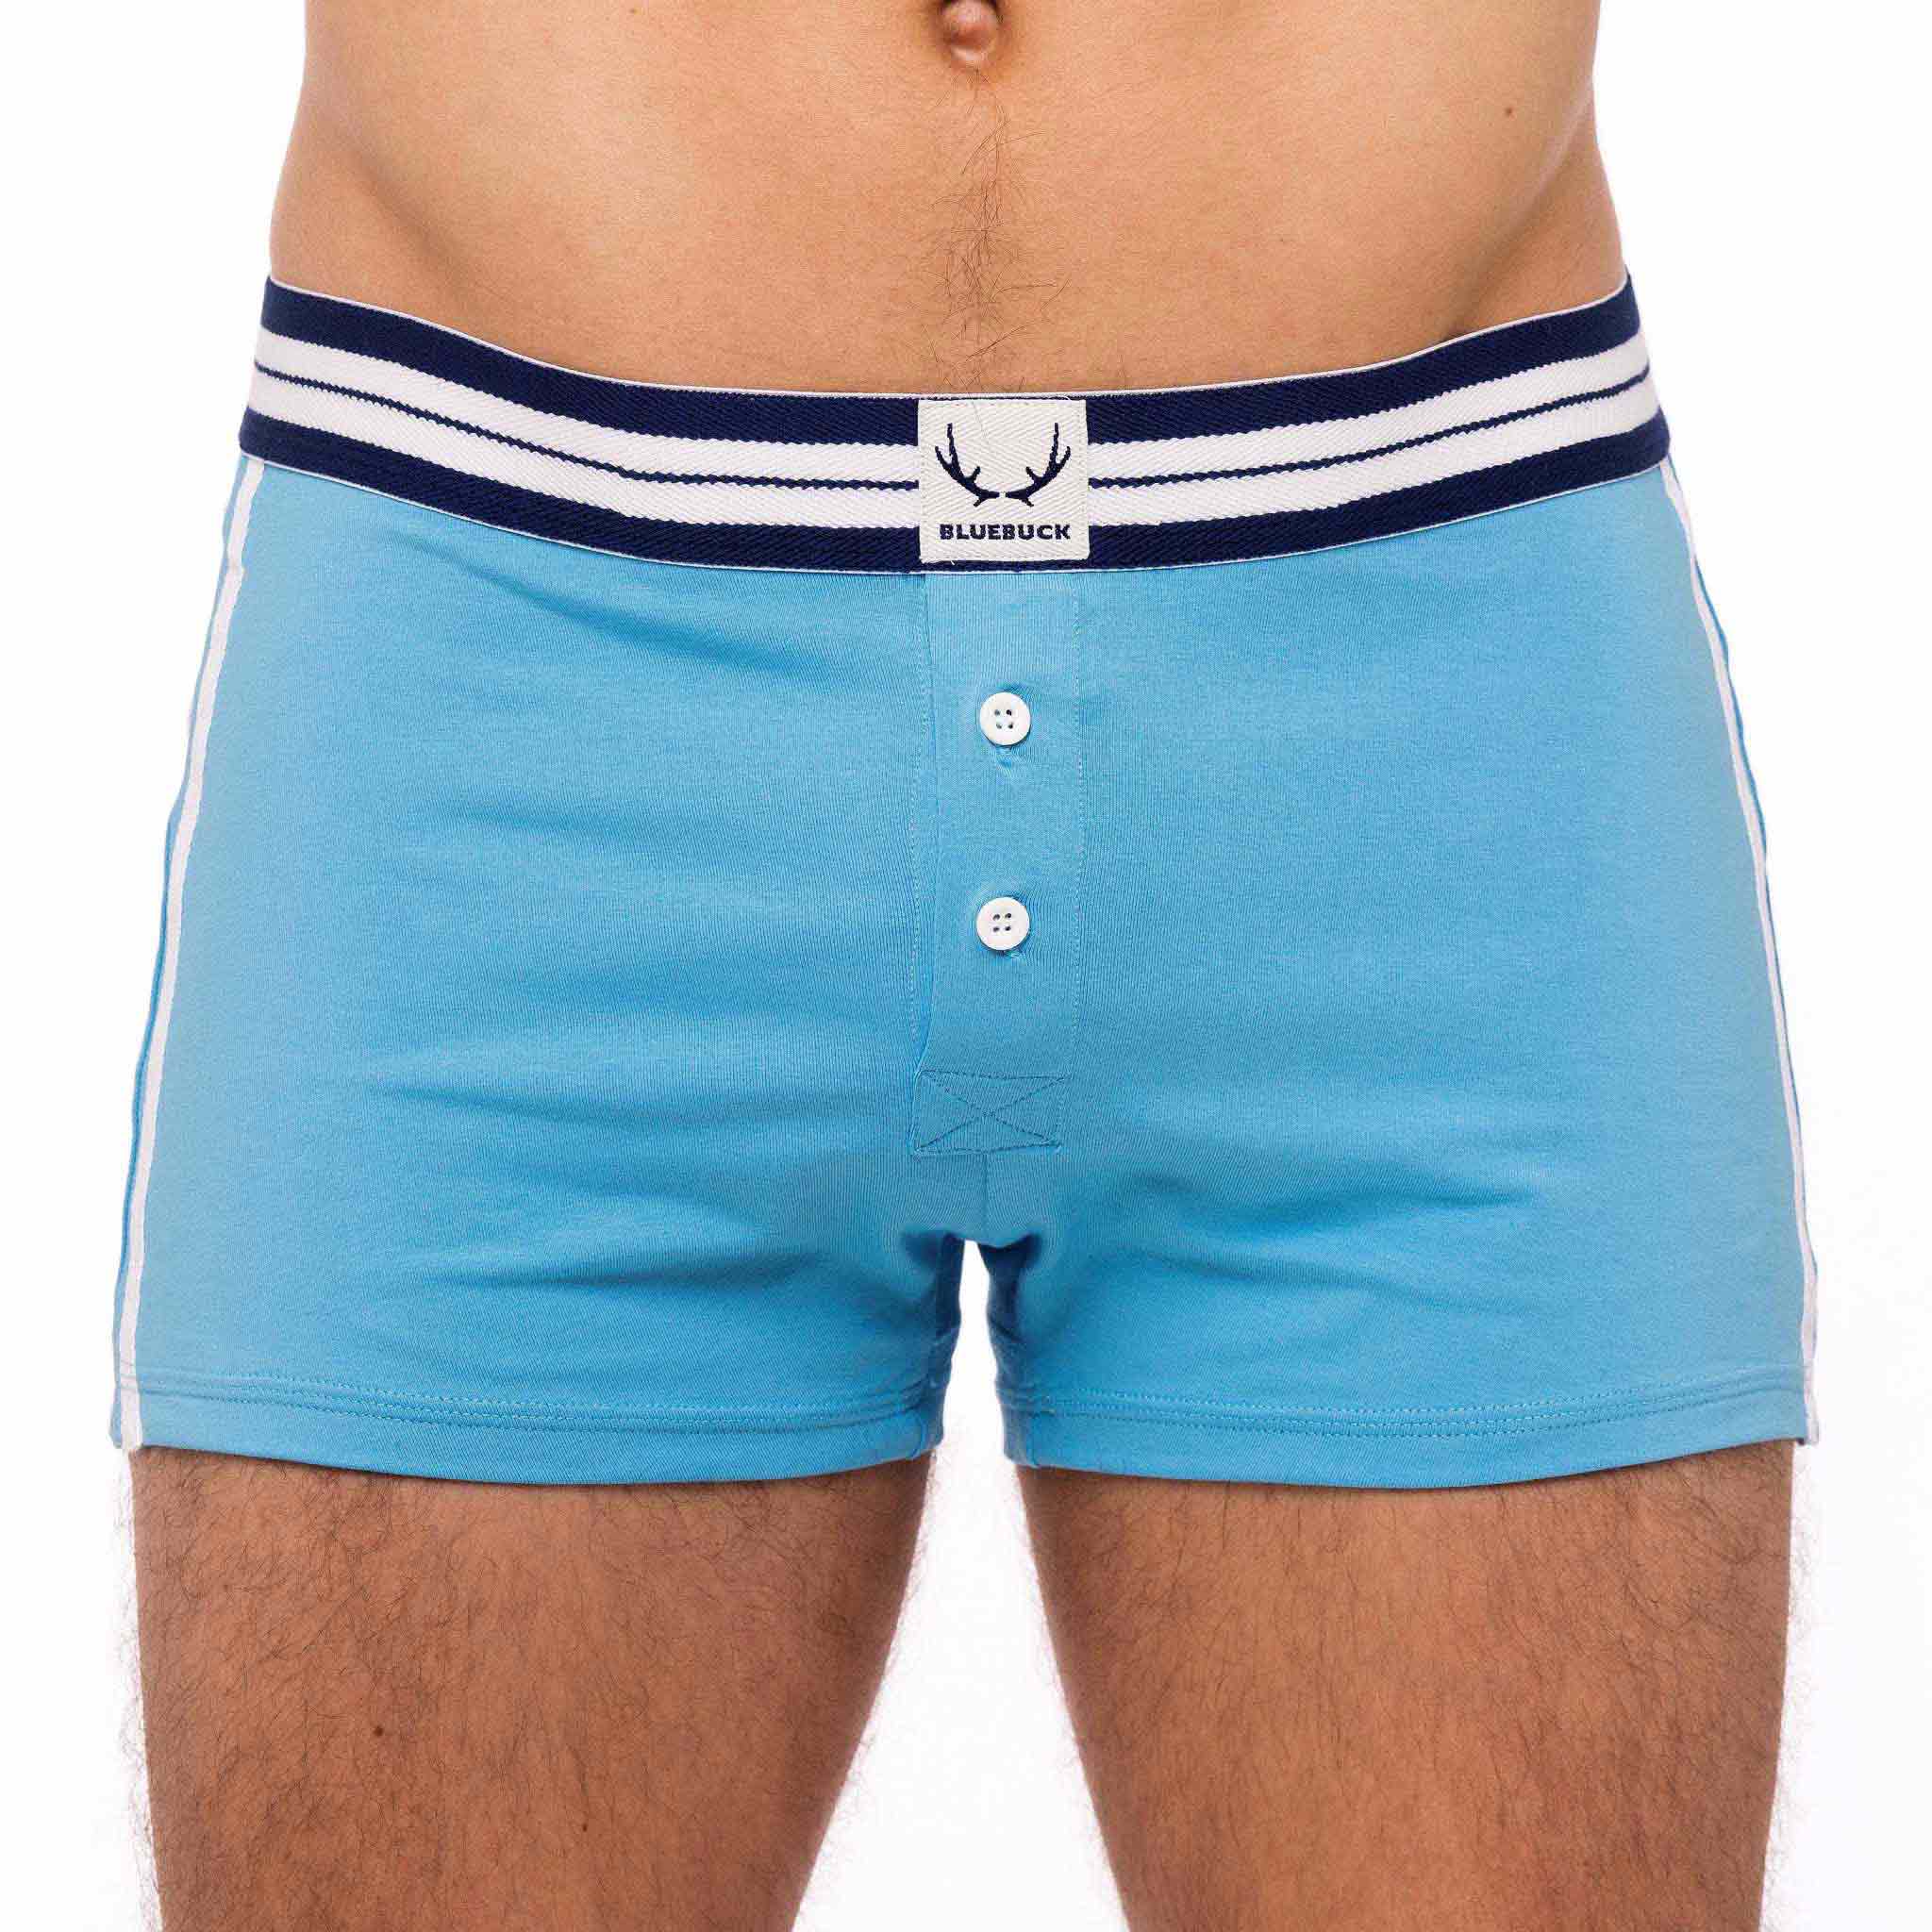 Light blue underpants made of organic cotton from Bluebuck